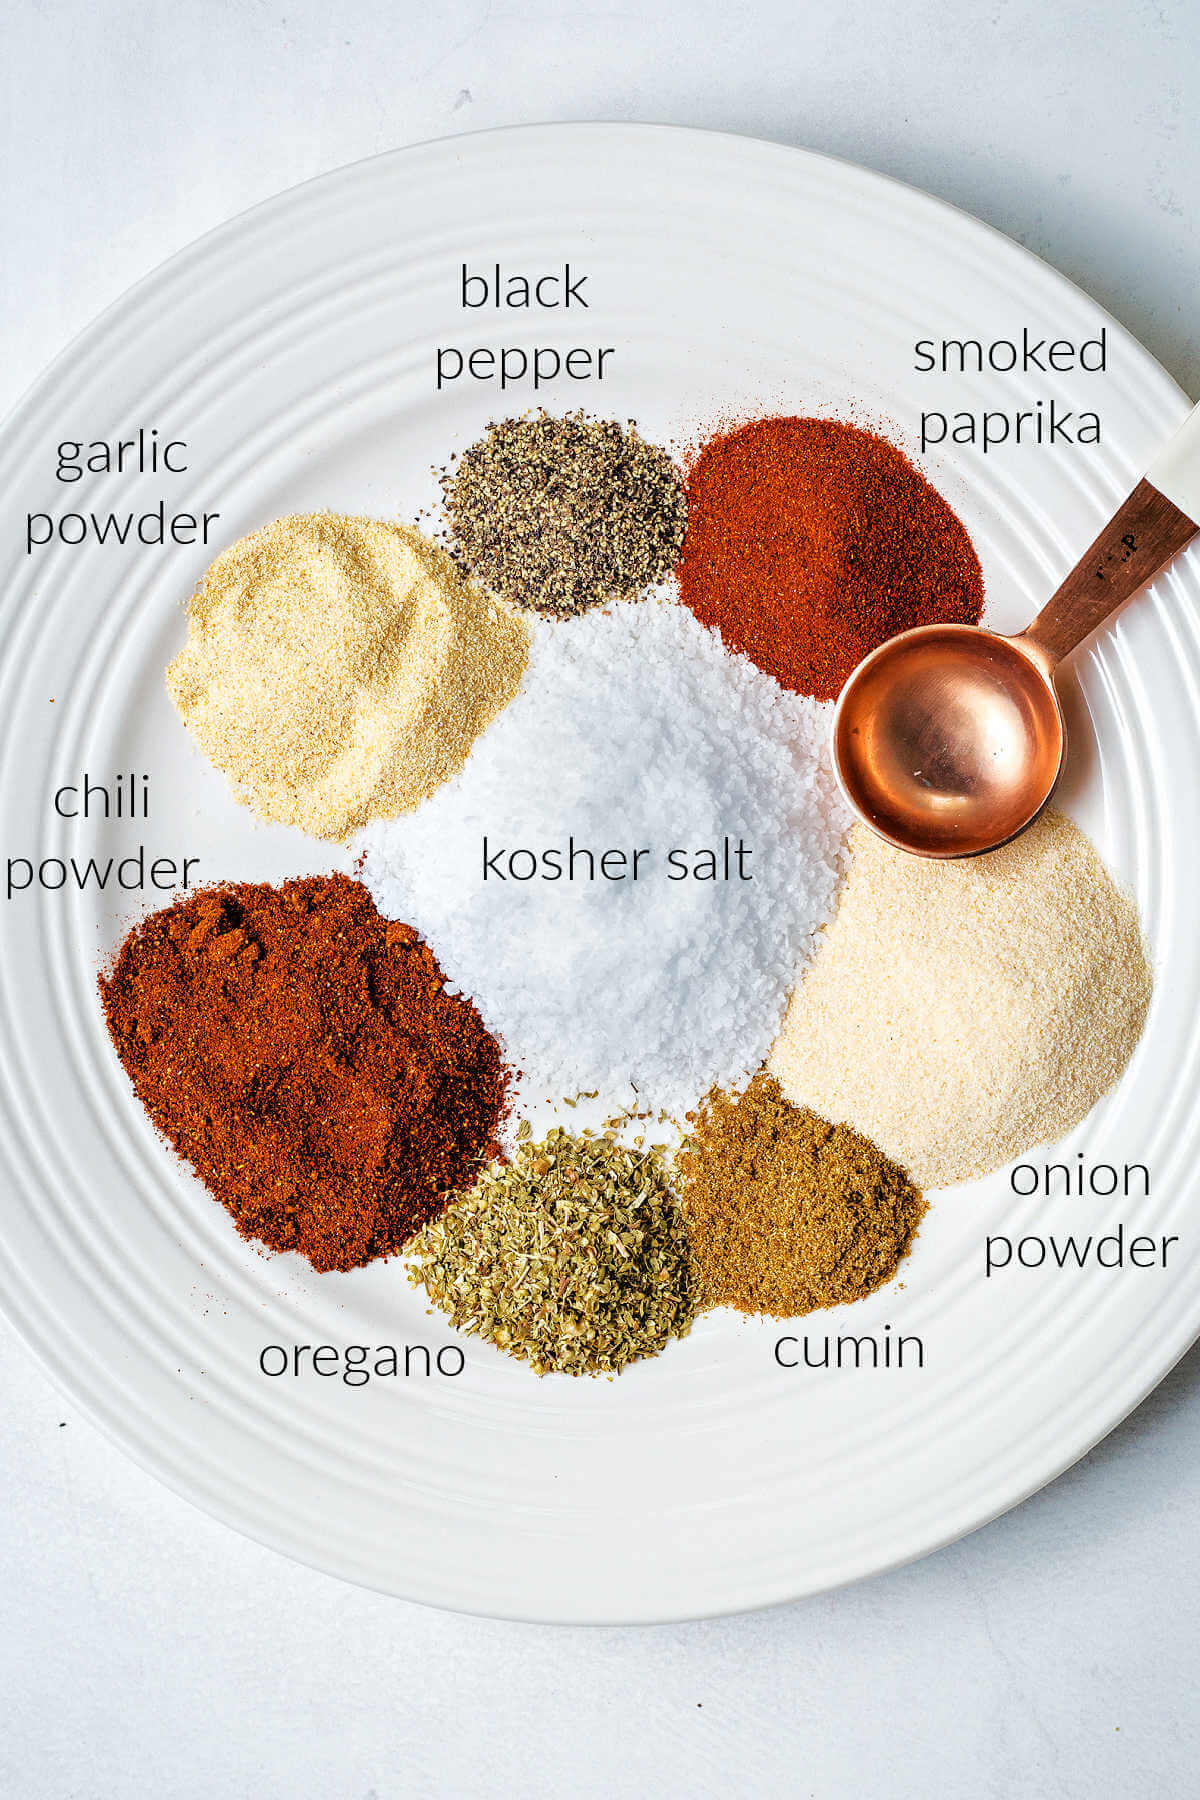 ingredients for homemade steak seasoning on a plate on a table.